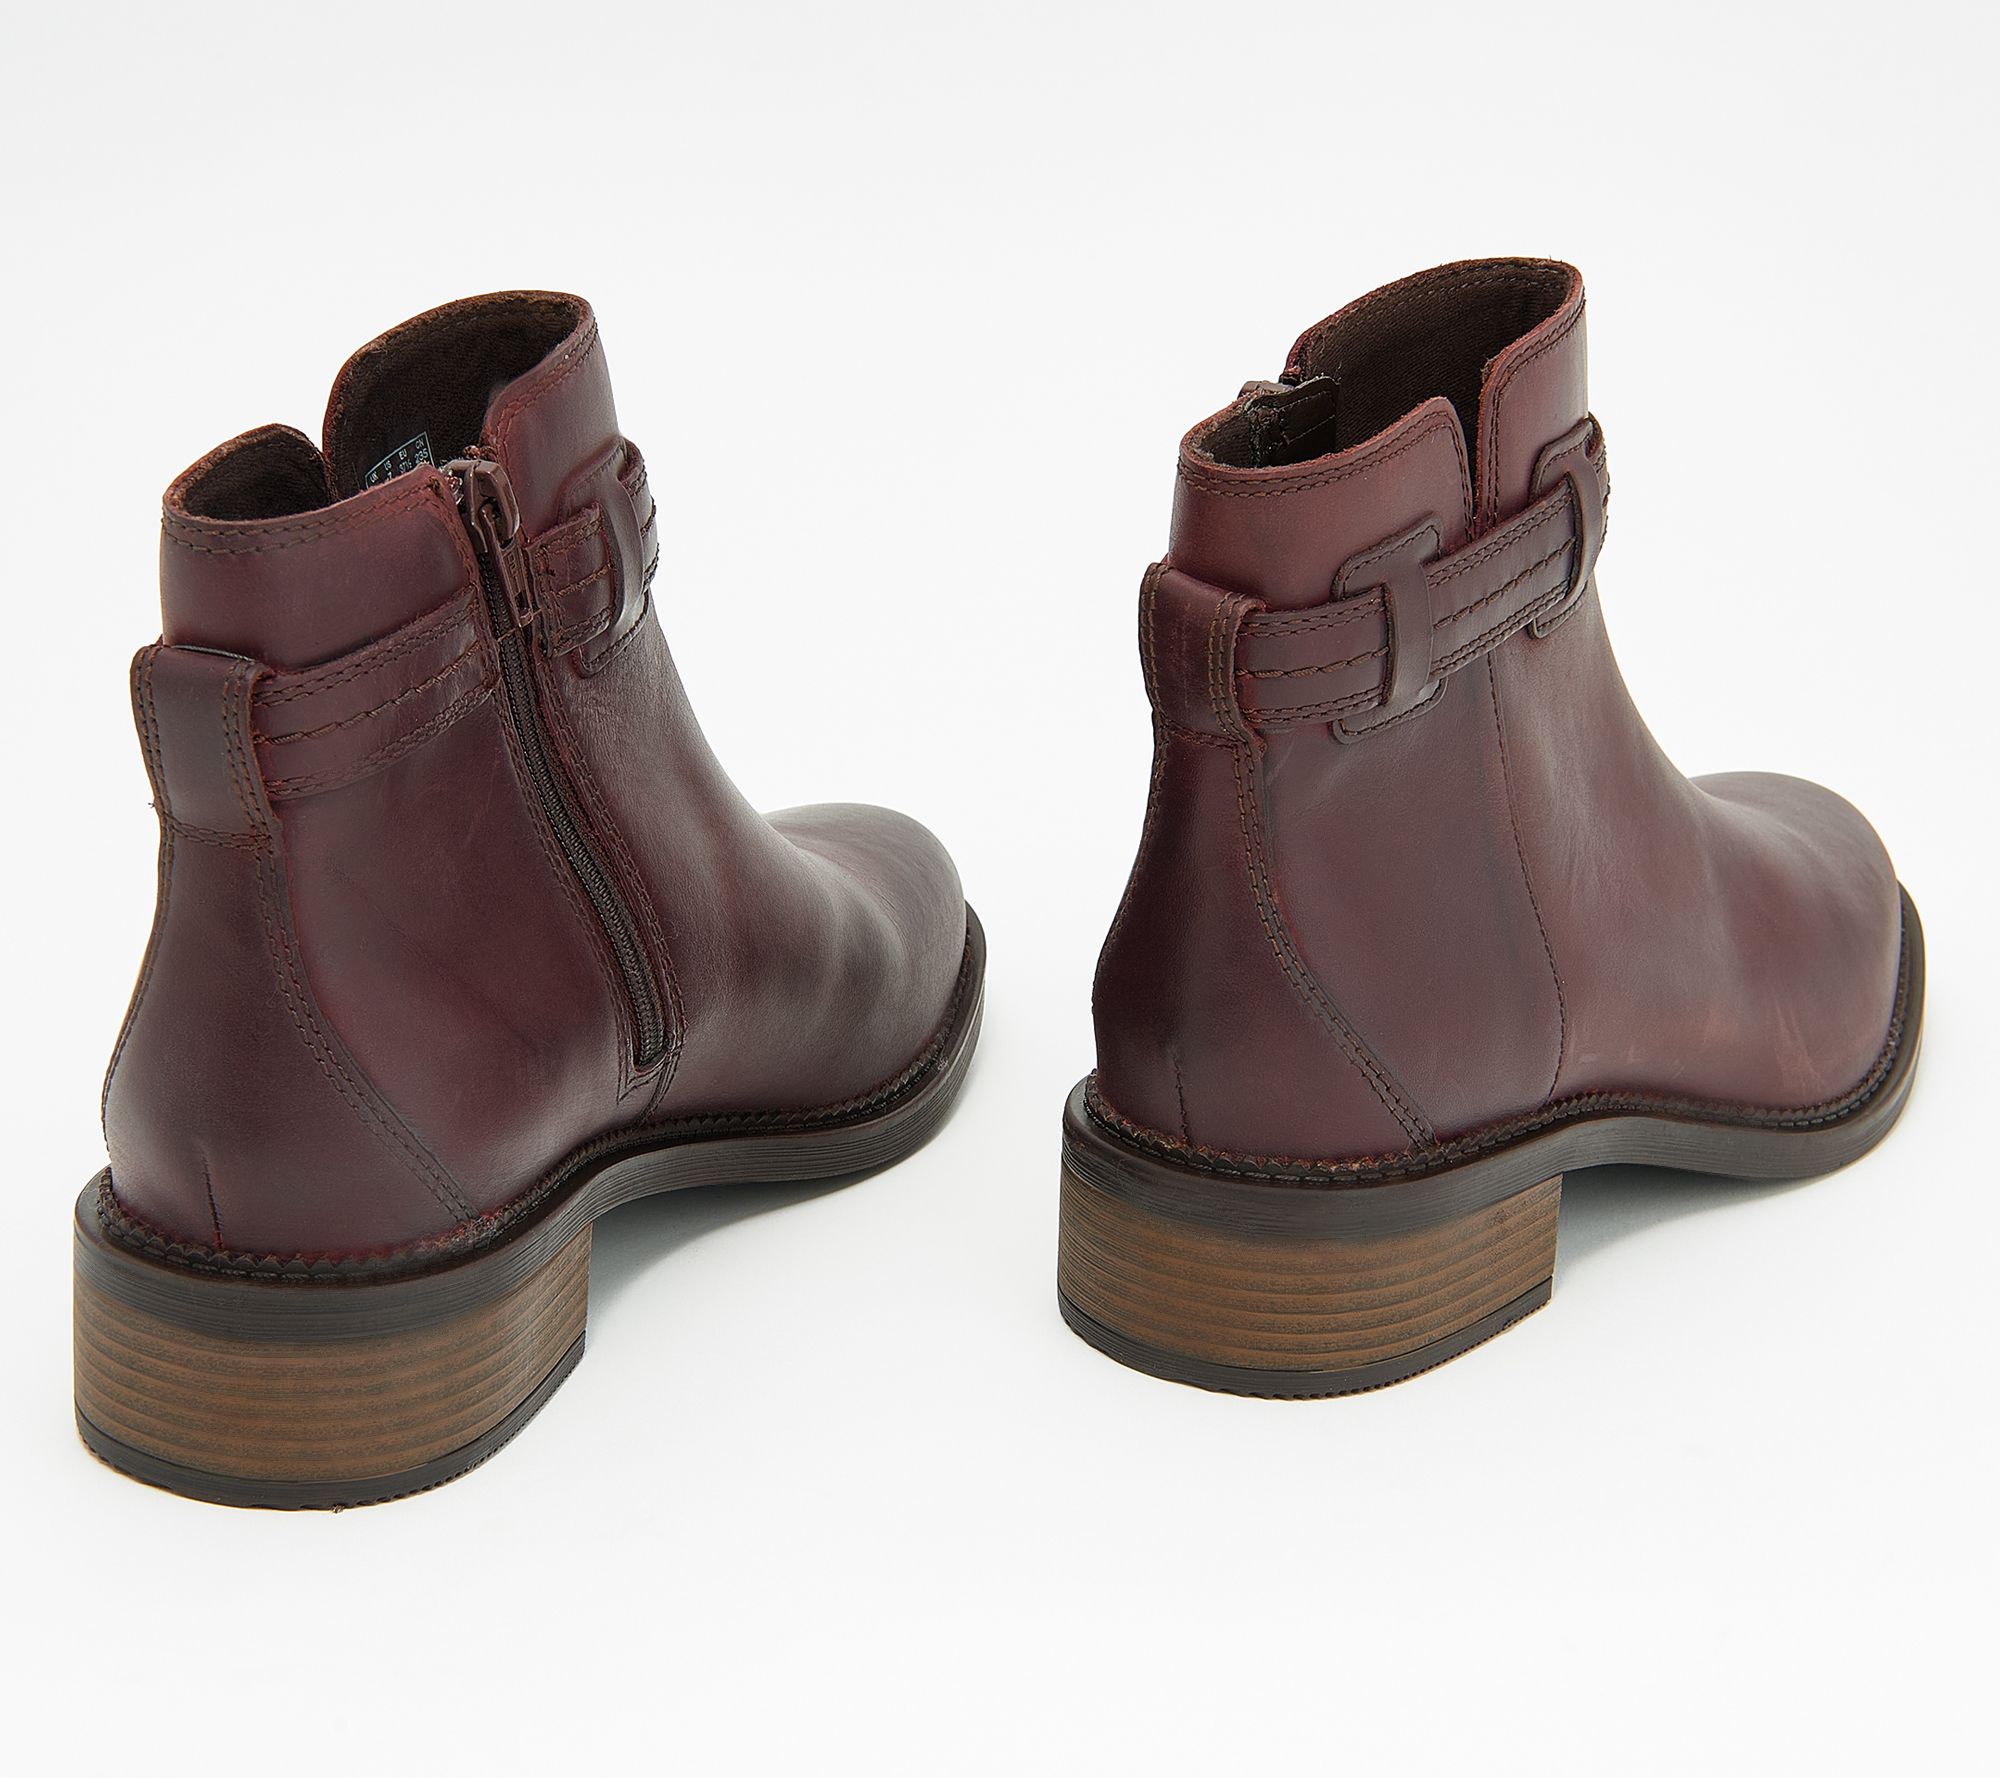 Clarks Collection Ankle Boots - Maye Ease - QVC.com